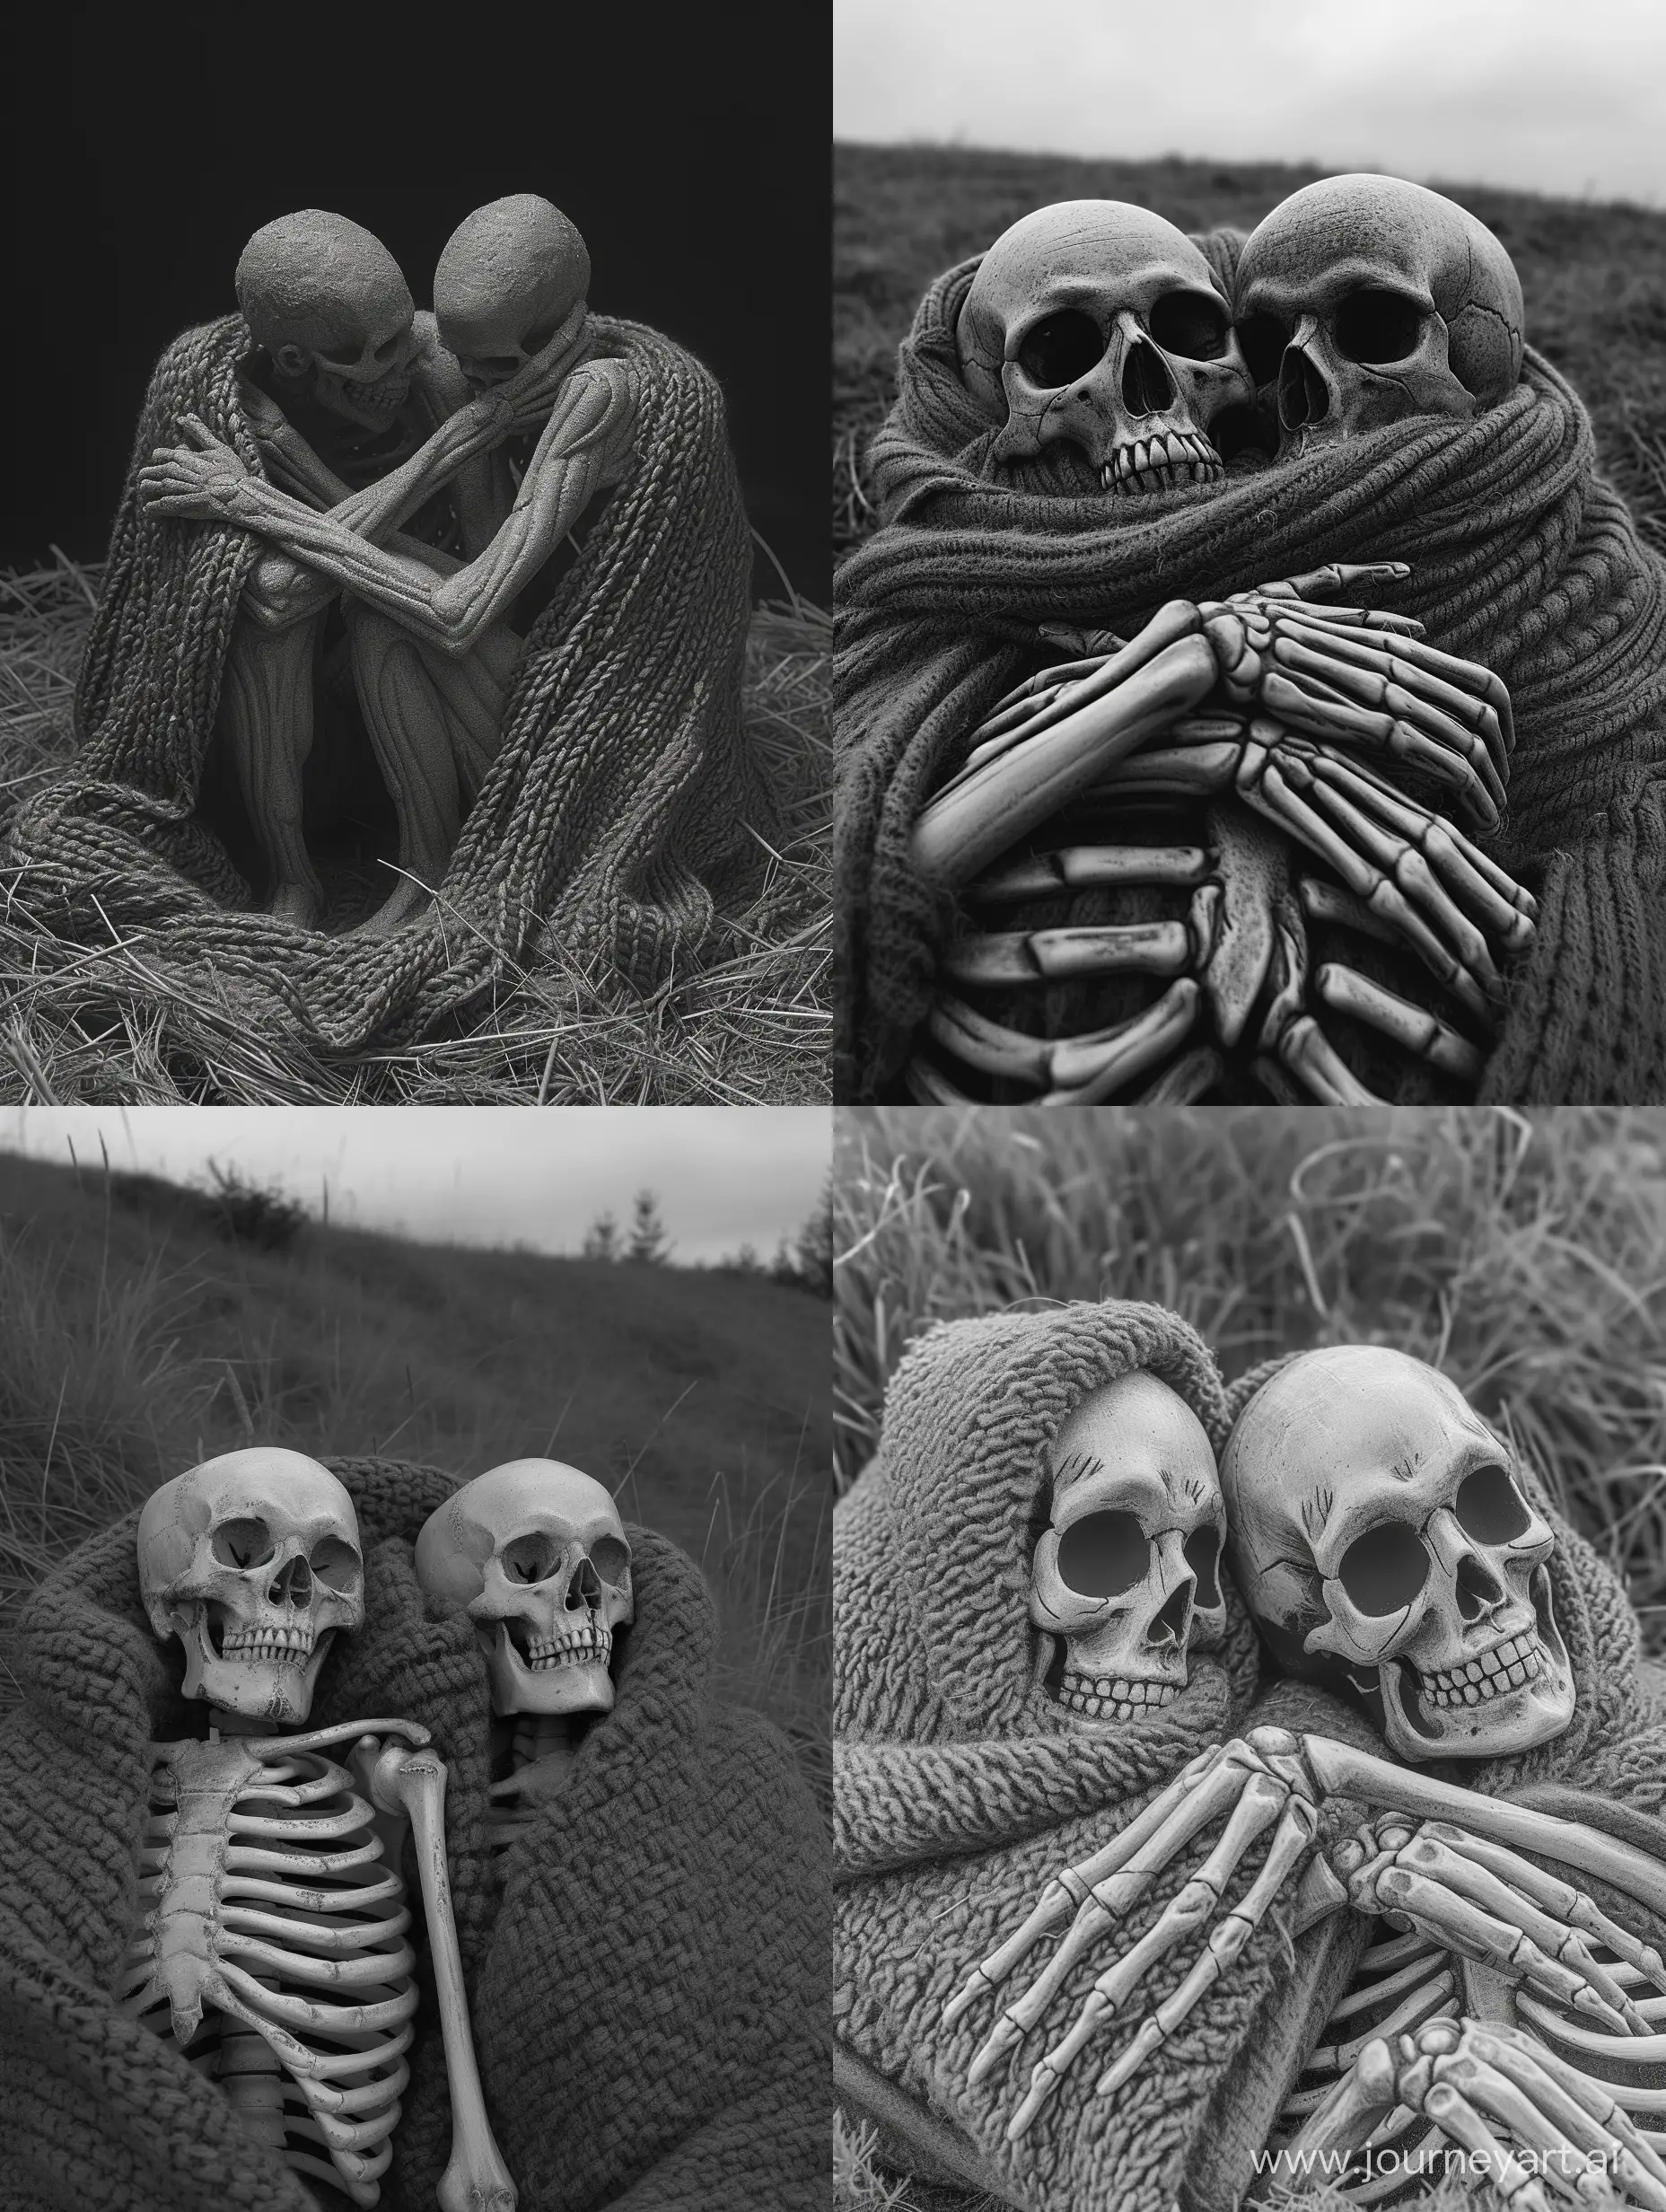 Grayscale image of male and female skeletal figures wrapped snuggly together in a wool blanket. They are lying in a field, dark aesthetic, taken on provia